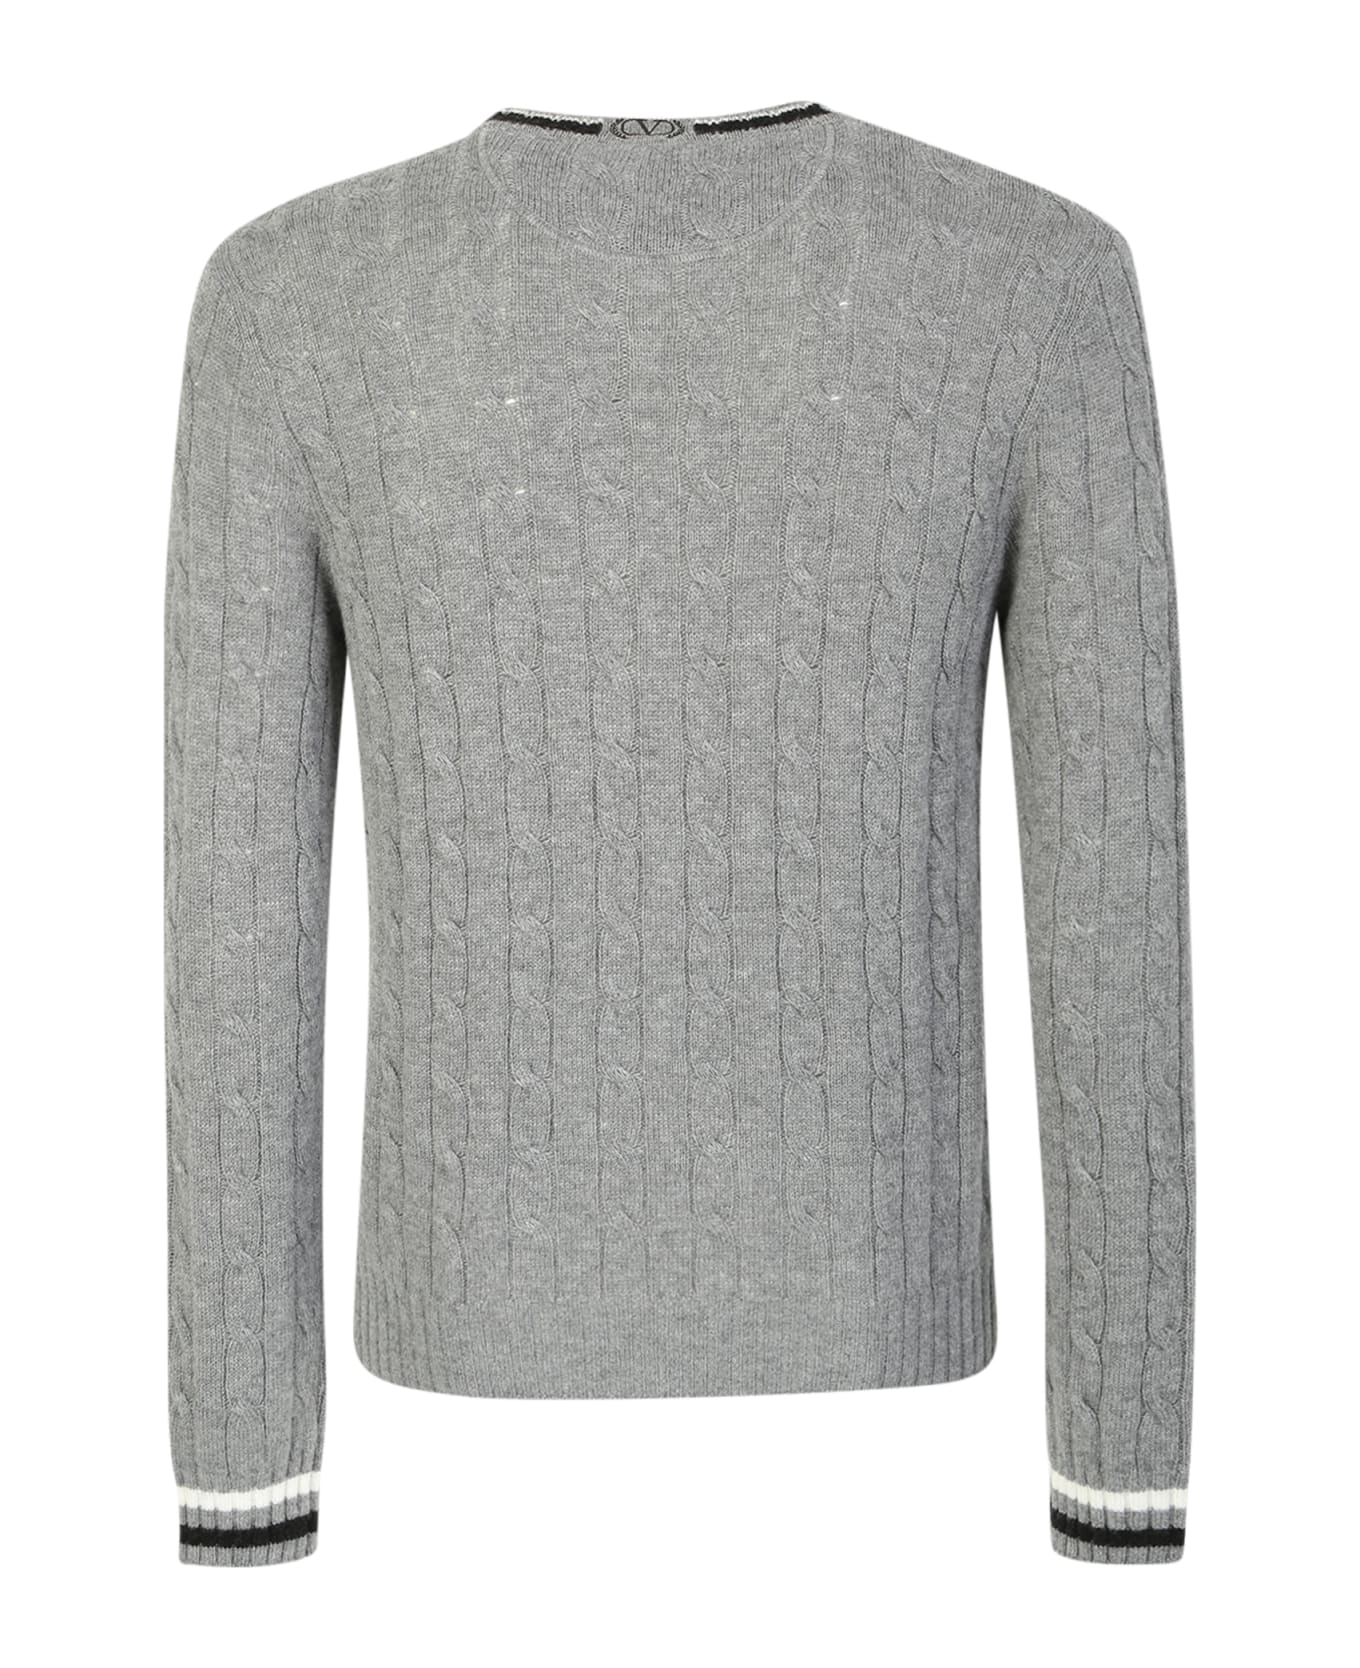 Valentino Cable Sweater Made Of Soft Virgin Wool - Grey